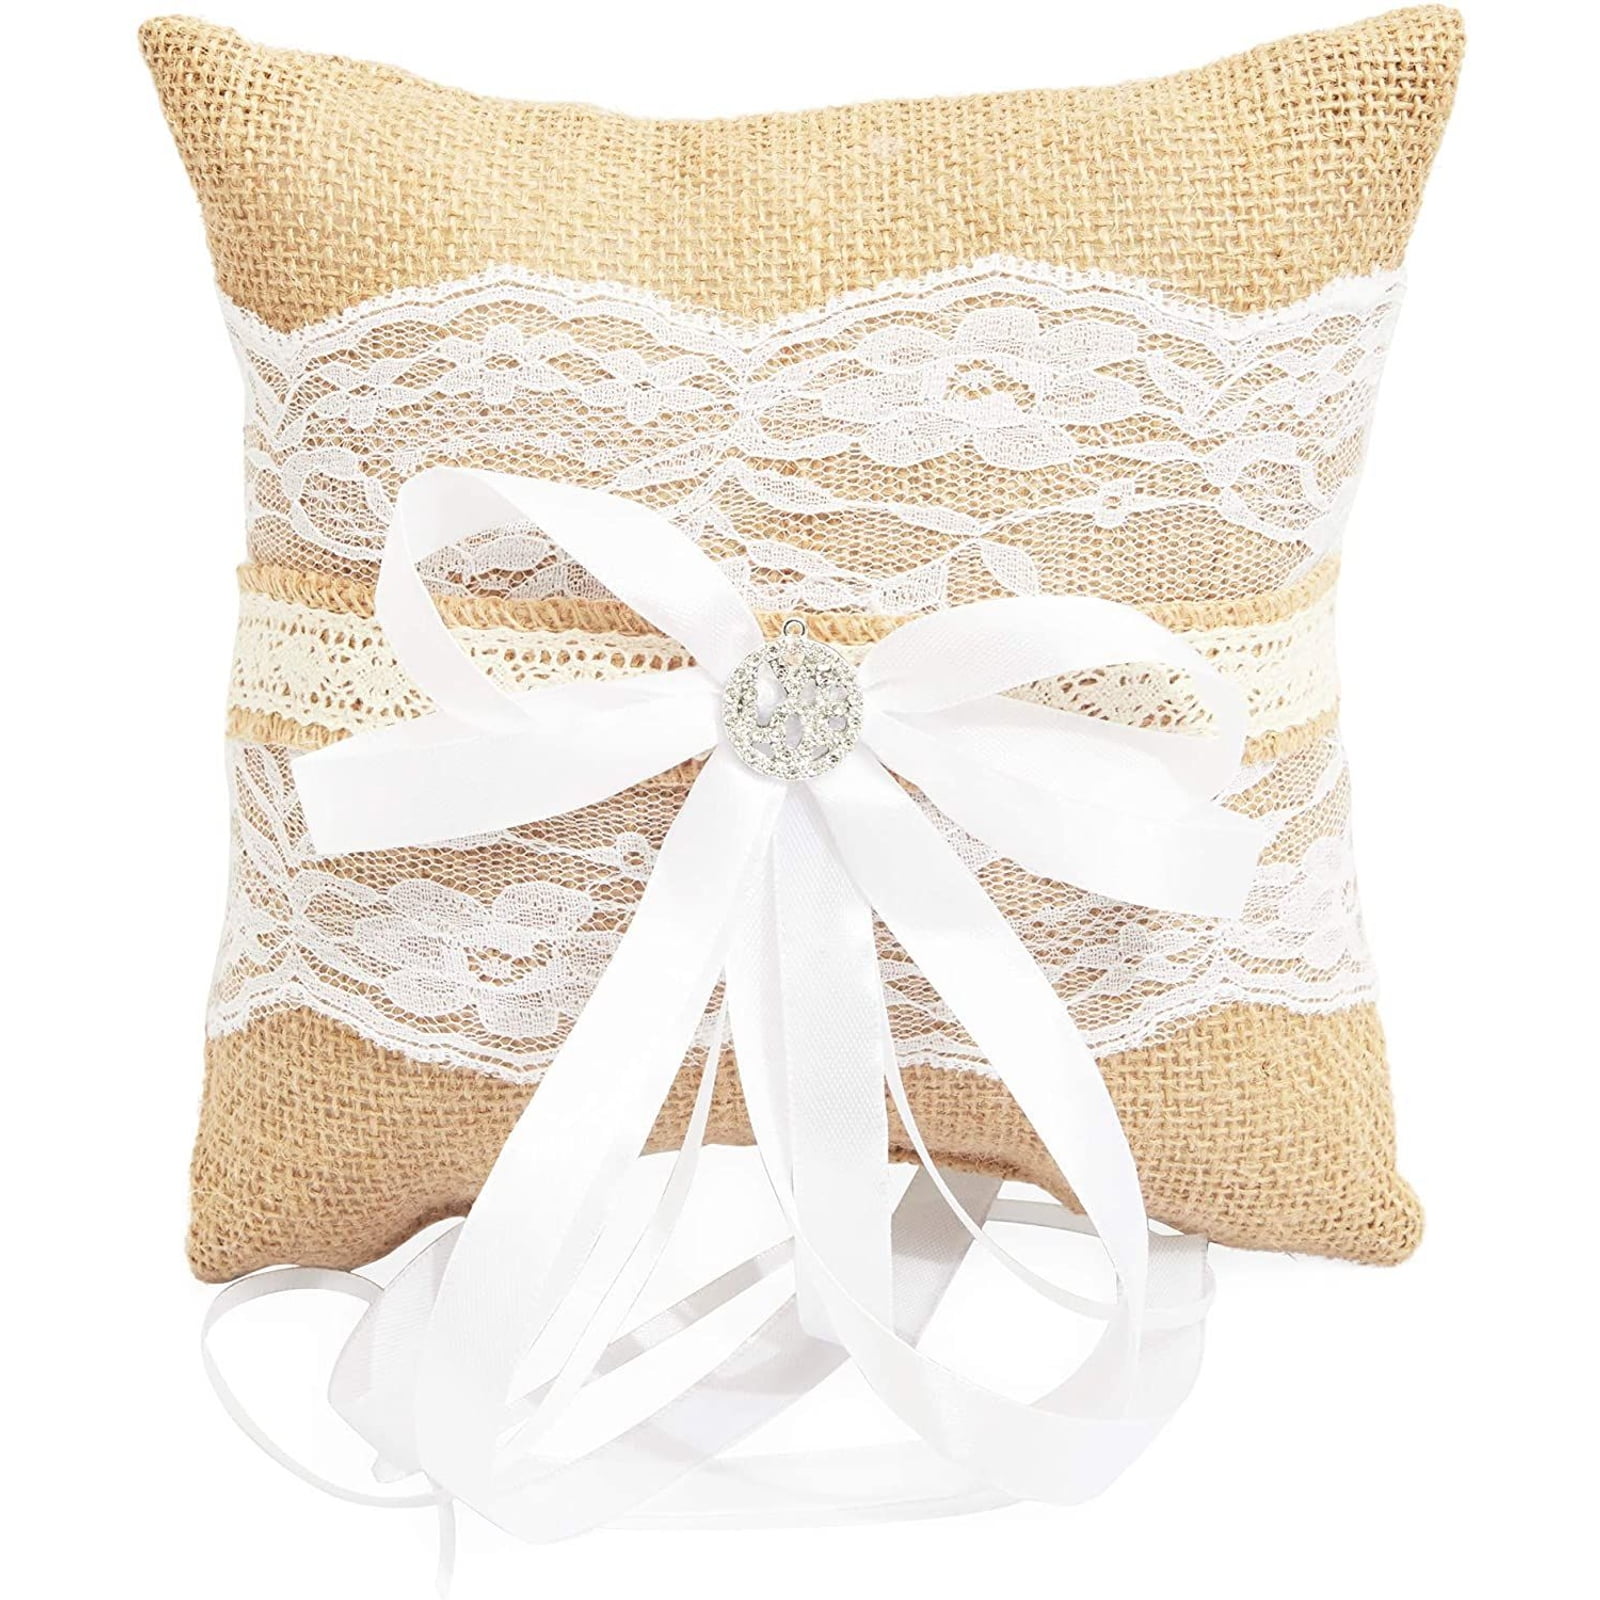 Burlap Lace Wedding Ring Bearer Pillow Hold For Enement Ceremonies Beige And White 7 5 X Inches Com